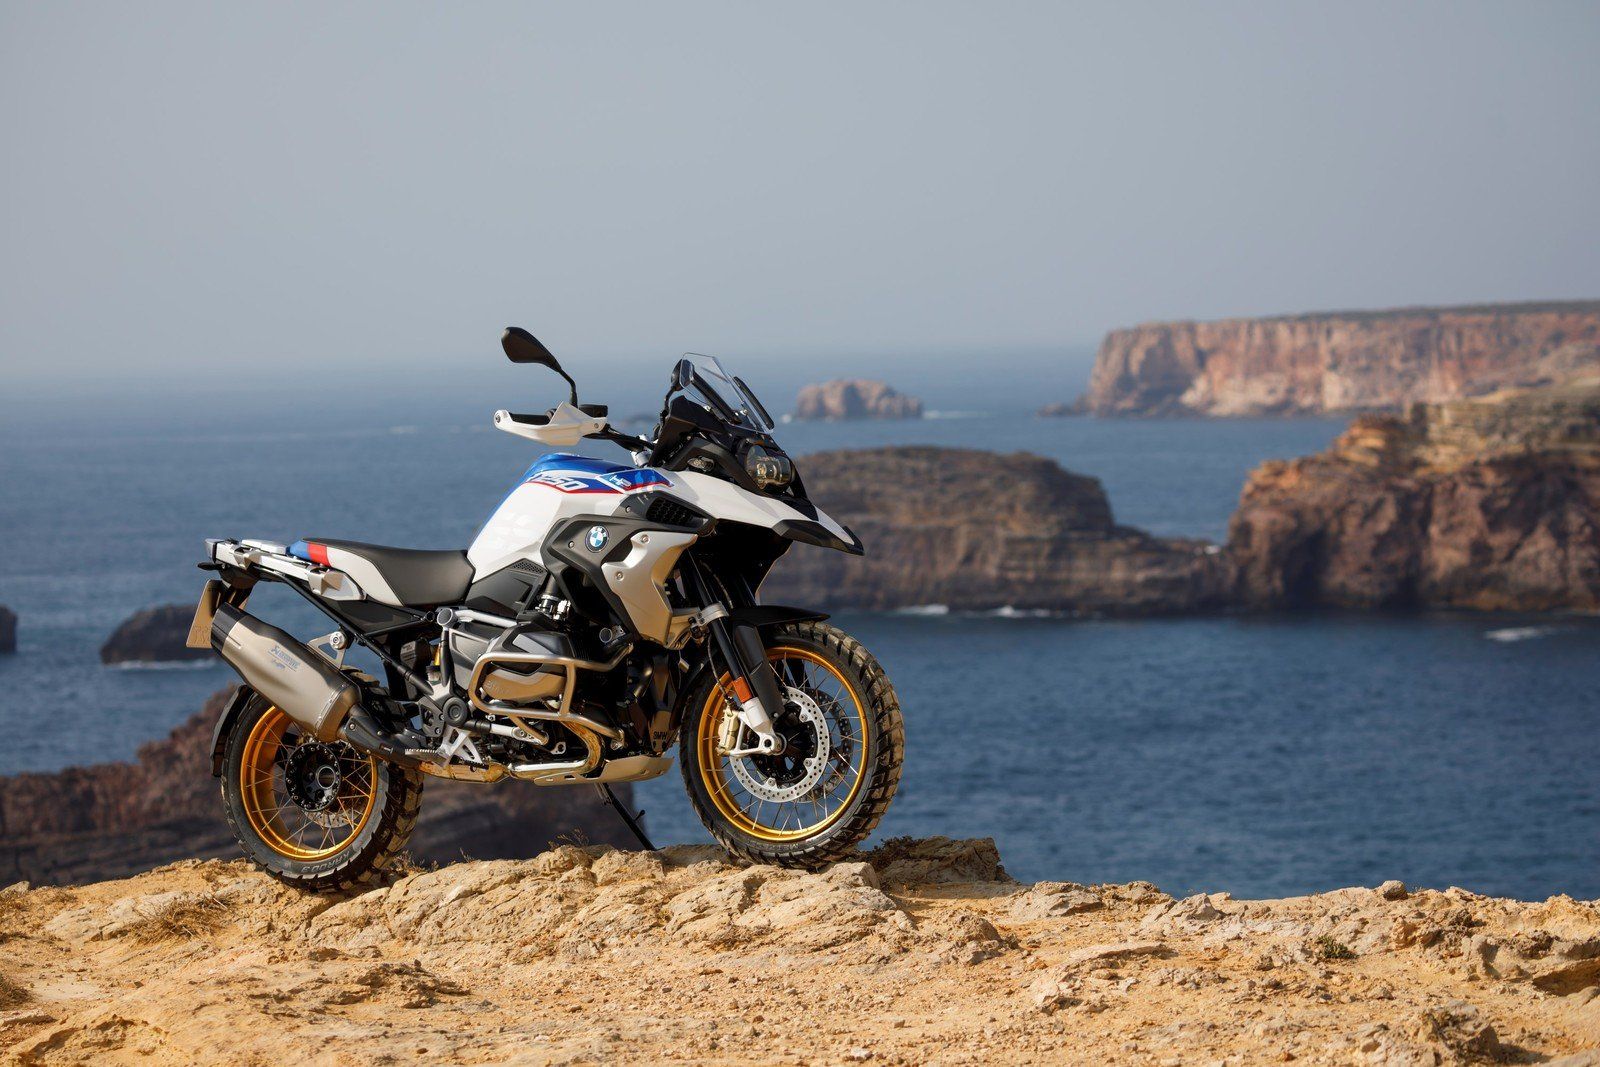 BMW R 1250 GS Picture, Photo, Wallpaper And Video